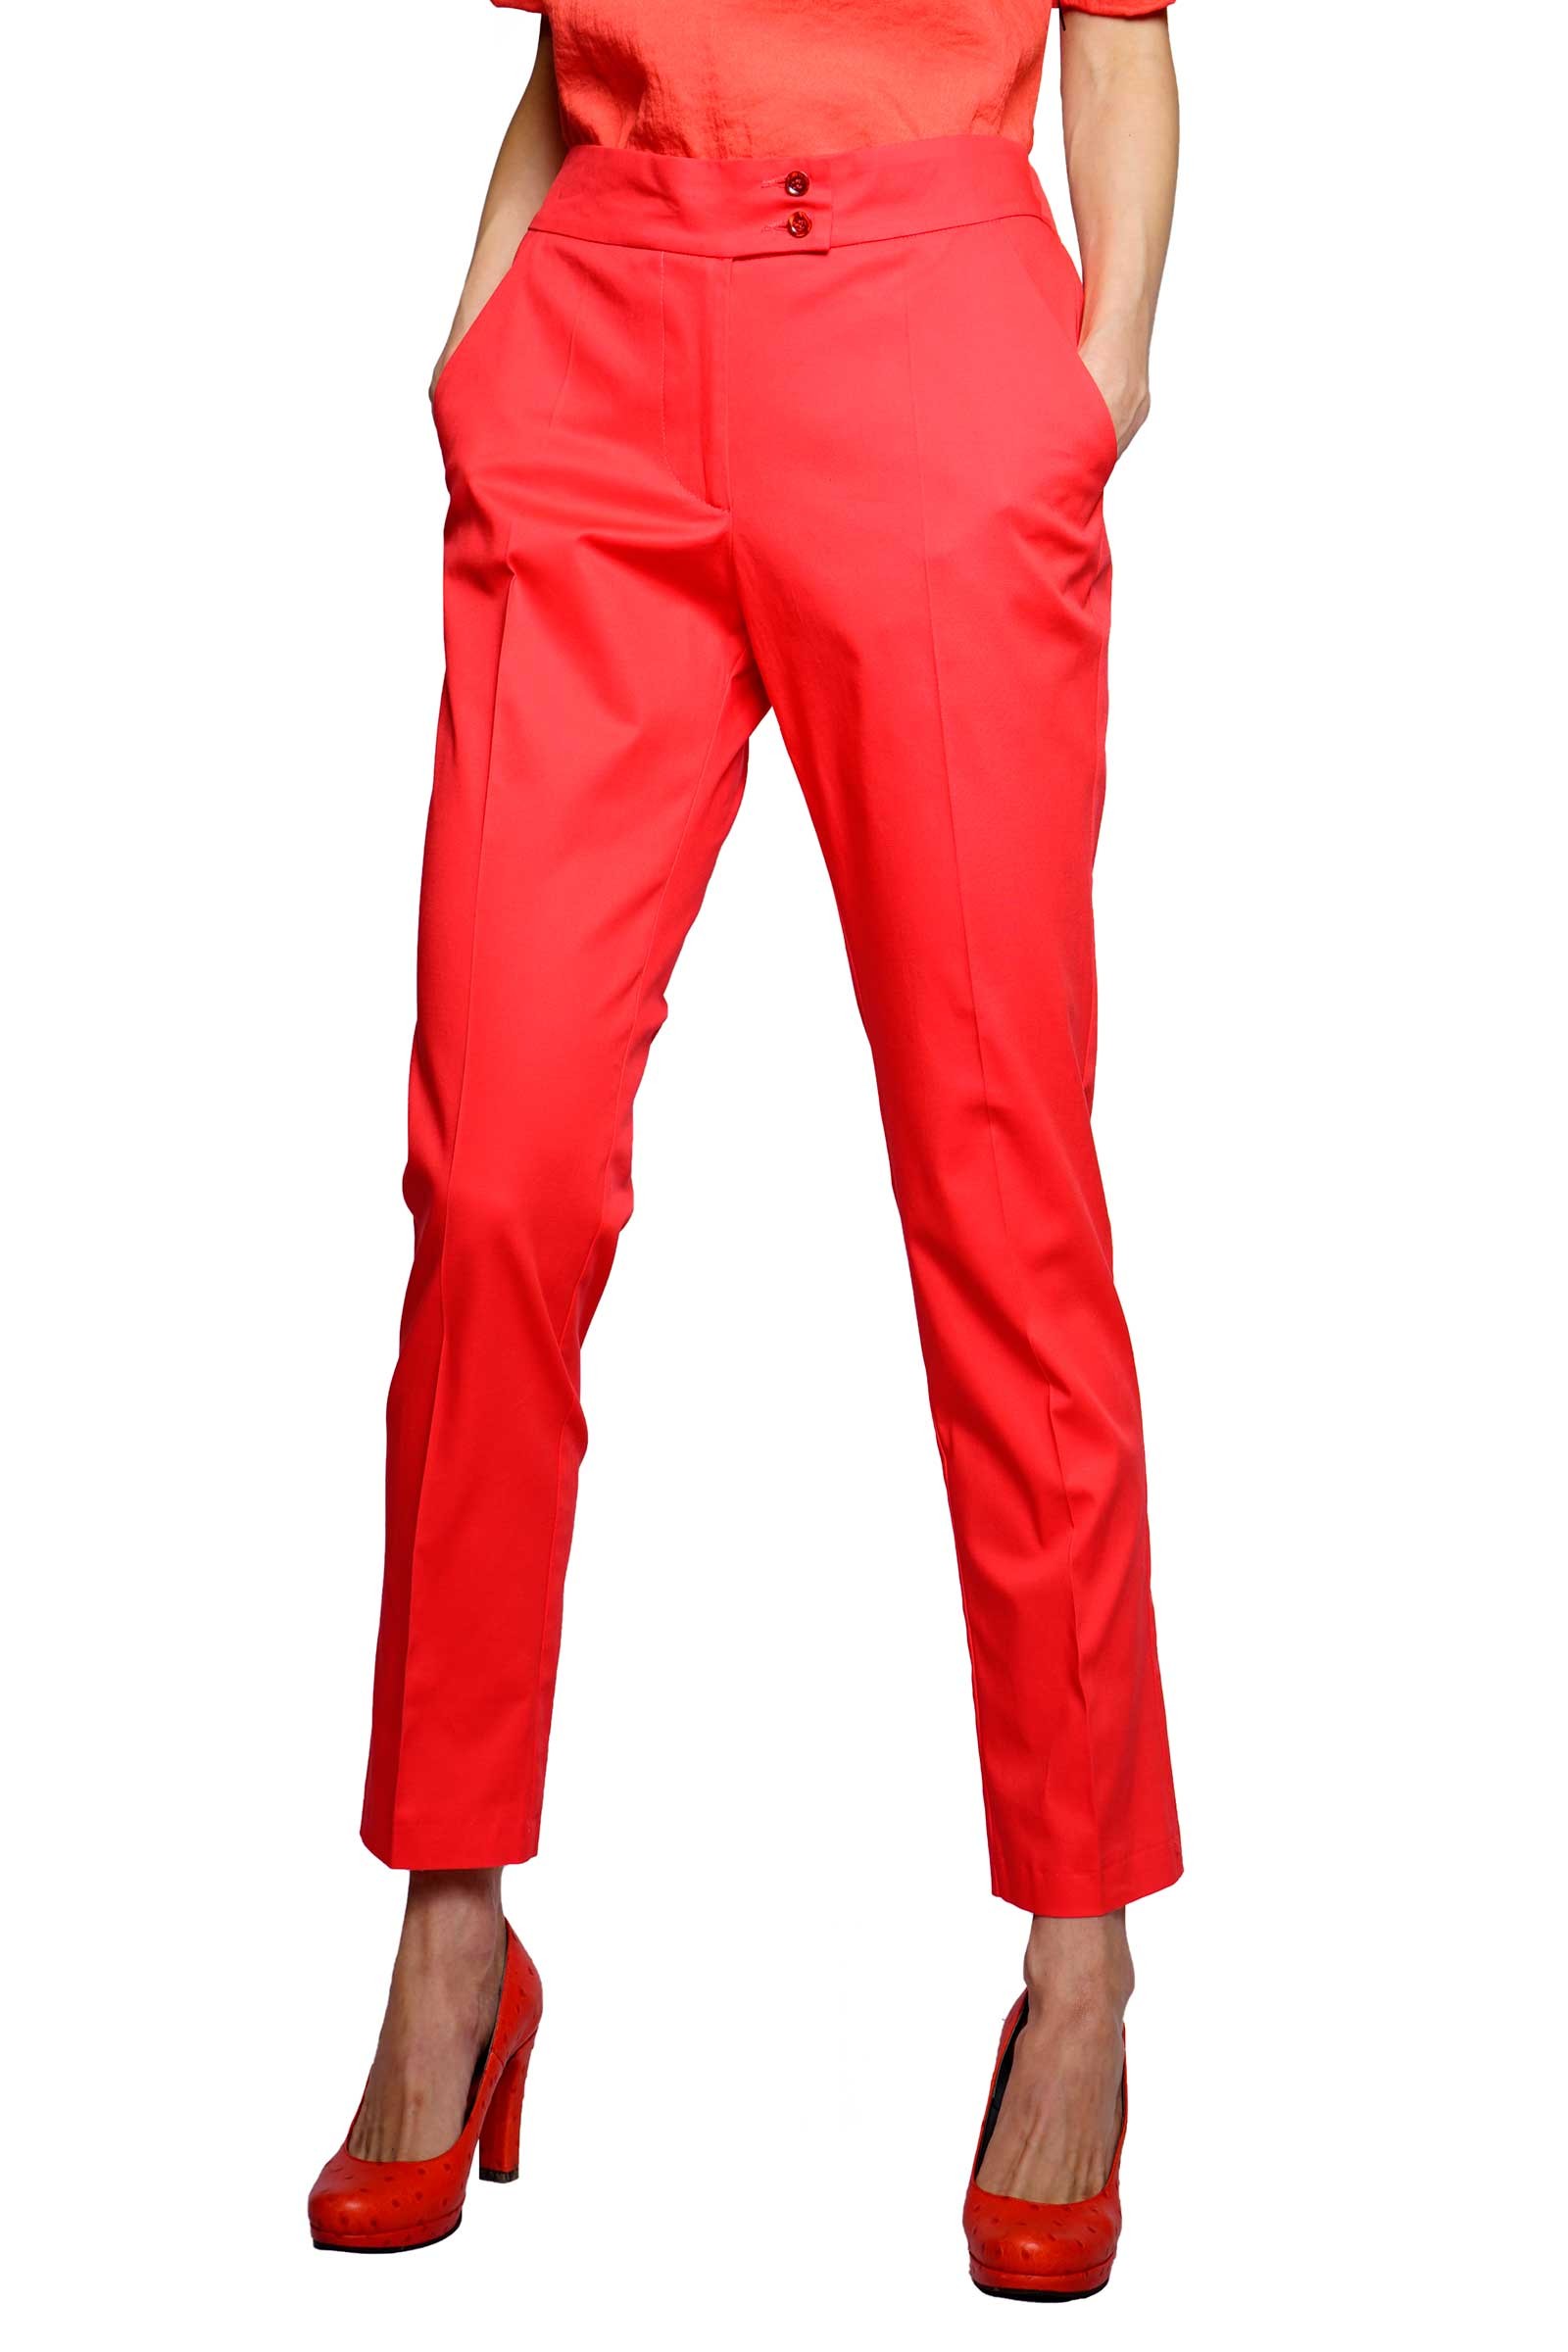 Straight red pants